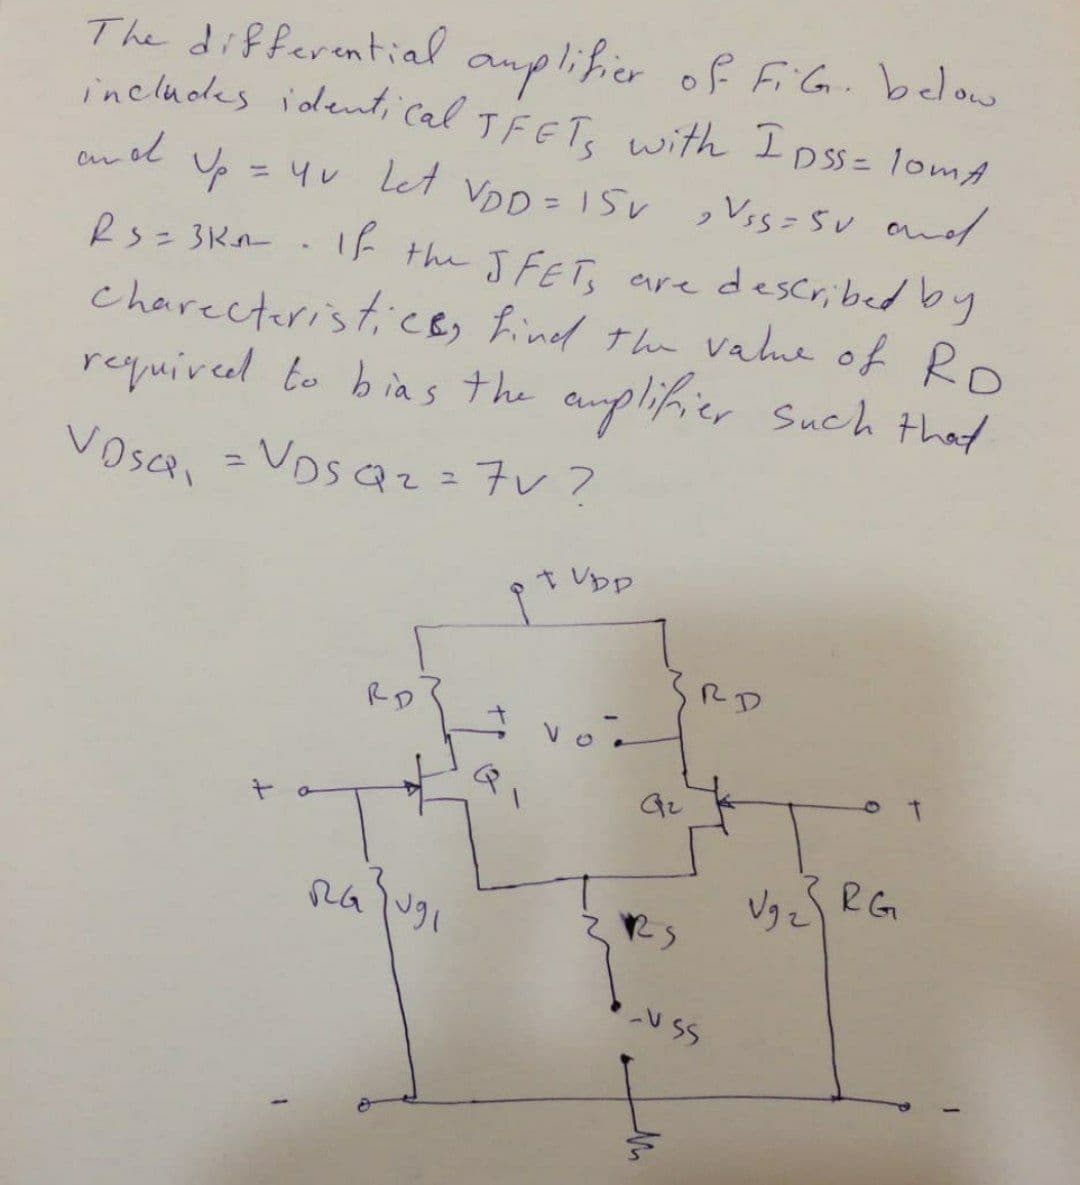 anplifier of FiG. below
includes identi cal TFETe with Ipss= lomA
TFET, with I oss= lomA
The differential
and
= Yu let
VDD = 15v ,Vss=SU and
es= 3Kn.If the JFET, aredescribed by
charecteristicB, find the vahe of Ro
required to bias the anplifier Such that
%3D
%3D
Vosca, =
Vos Qz=7v?
%3D
t Vpp
RD
RD
Vg zS RG
U SS
